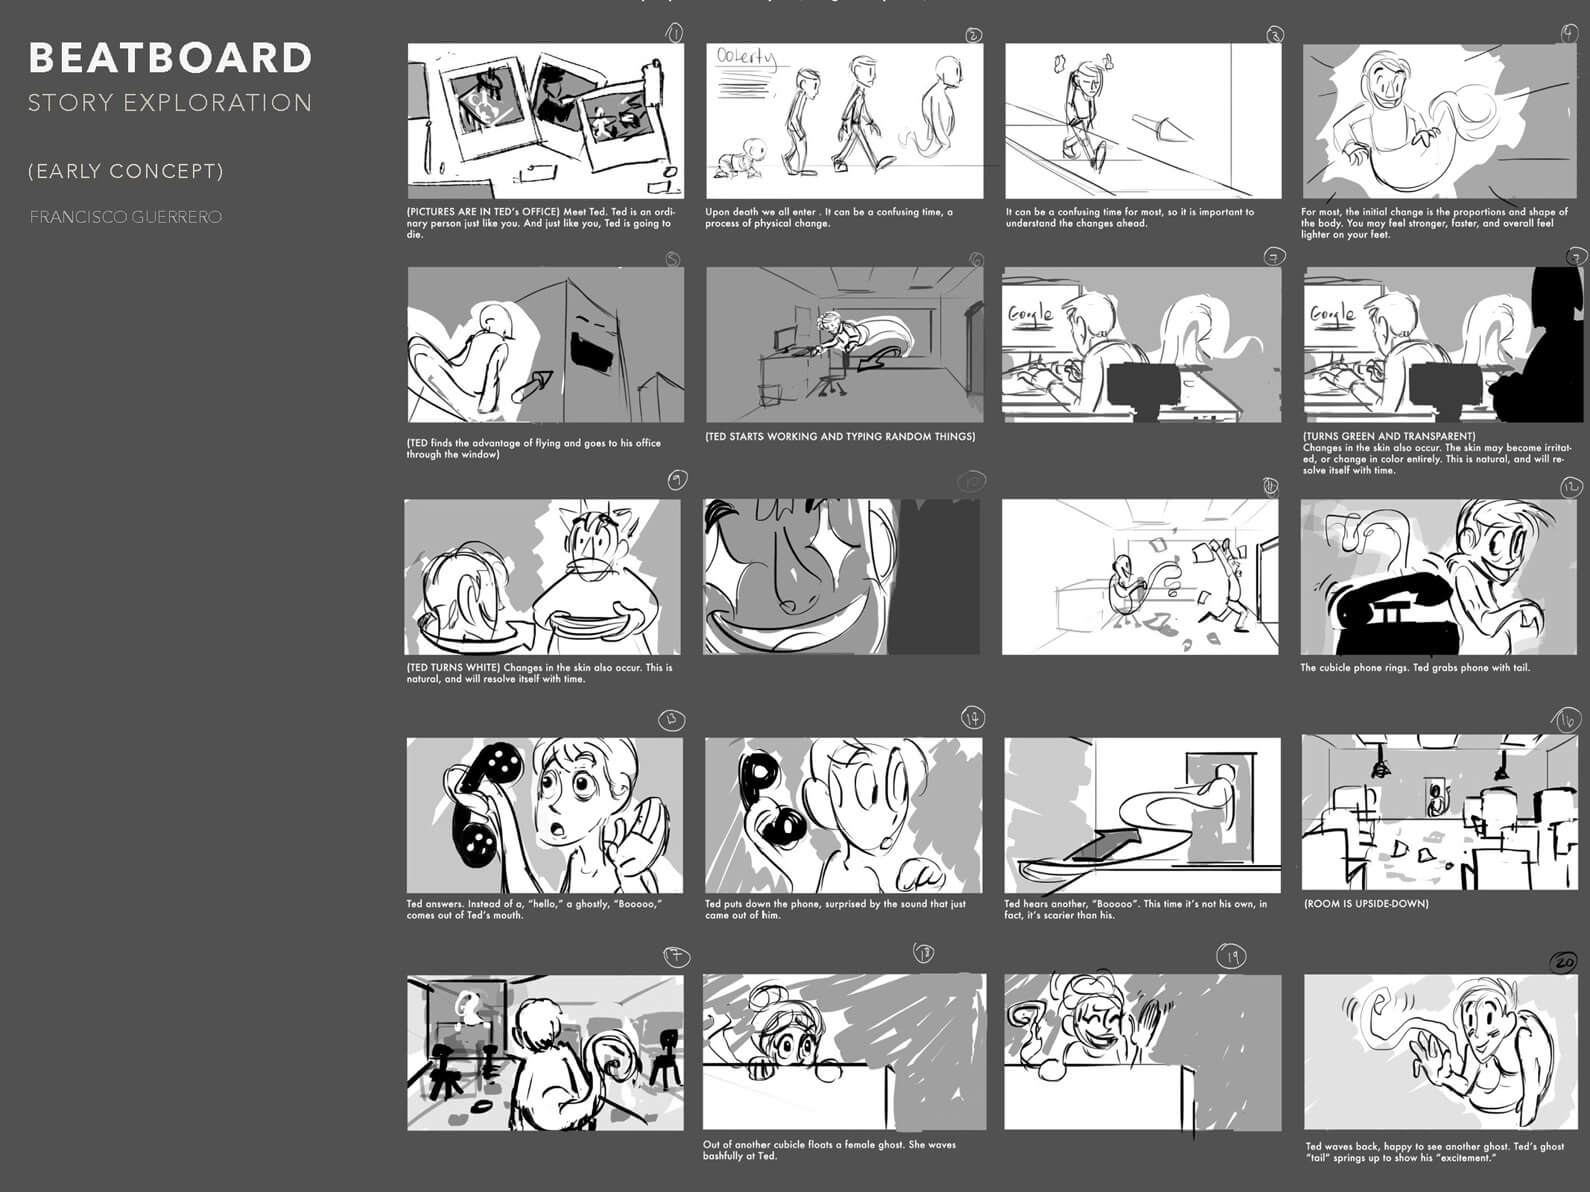 Second beatboard and black and white sketches depicting the initial extended plot of Orientation Center for the Unseen